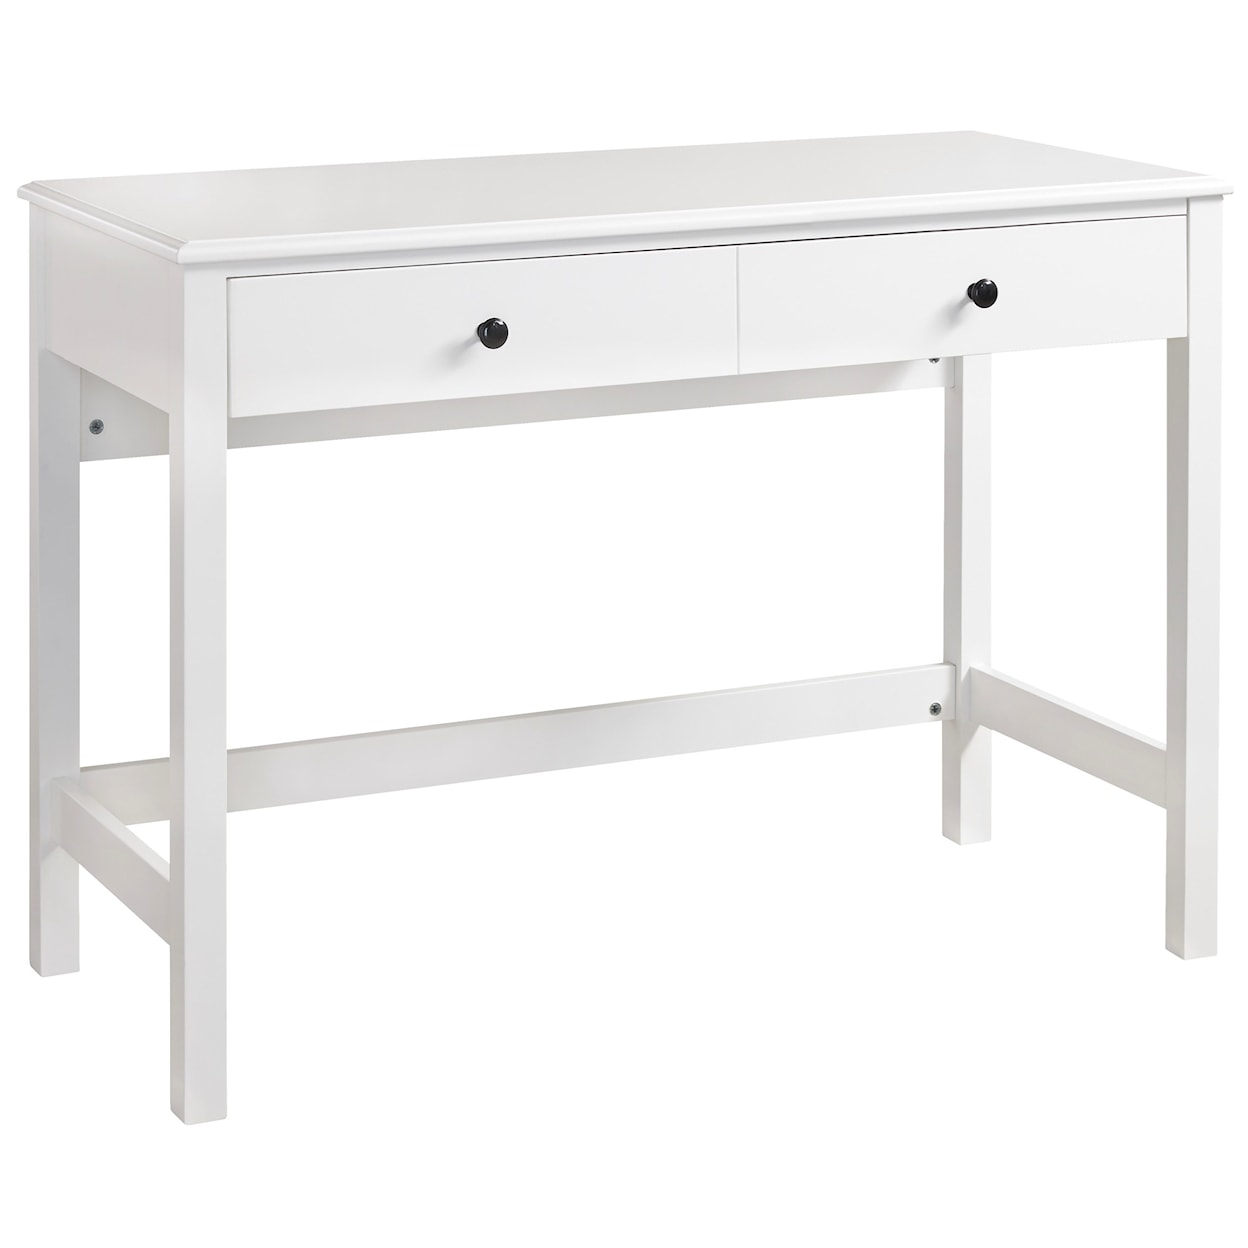 Benchcraft Othello Home Office Small Desk